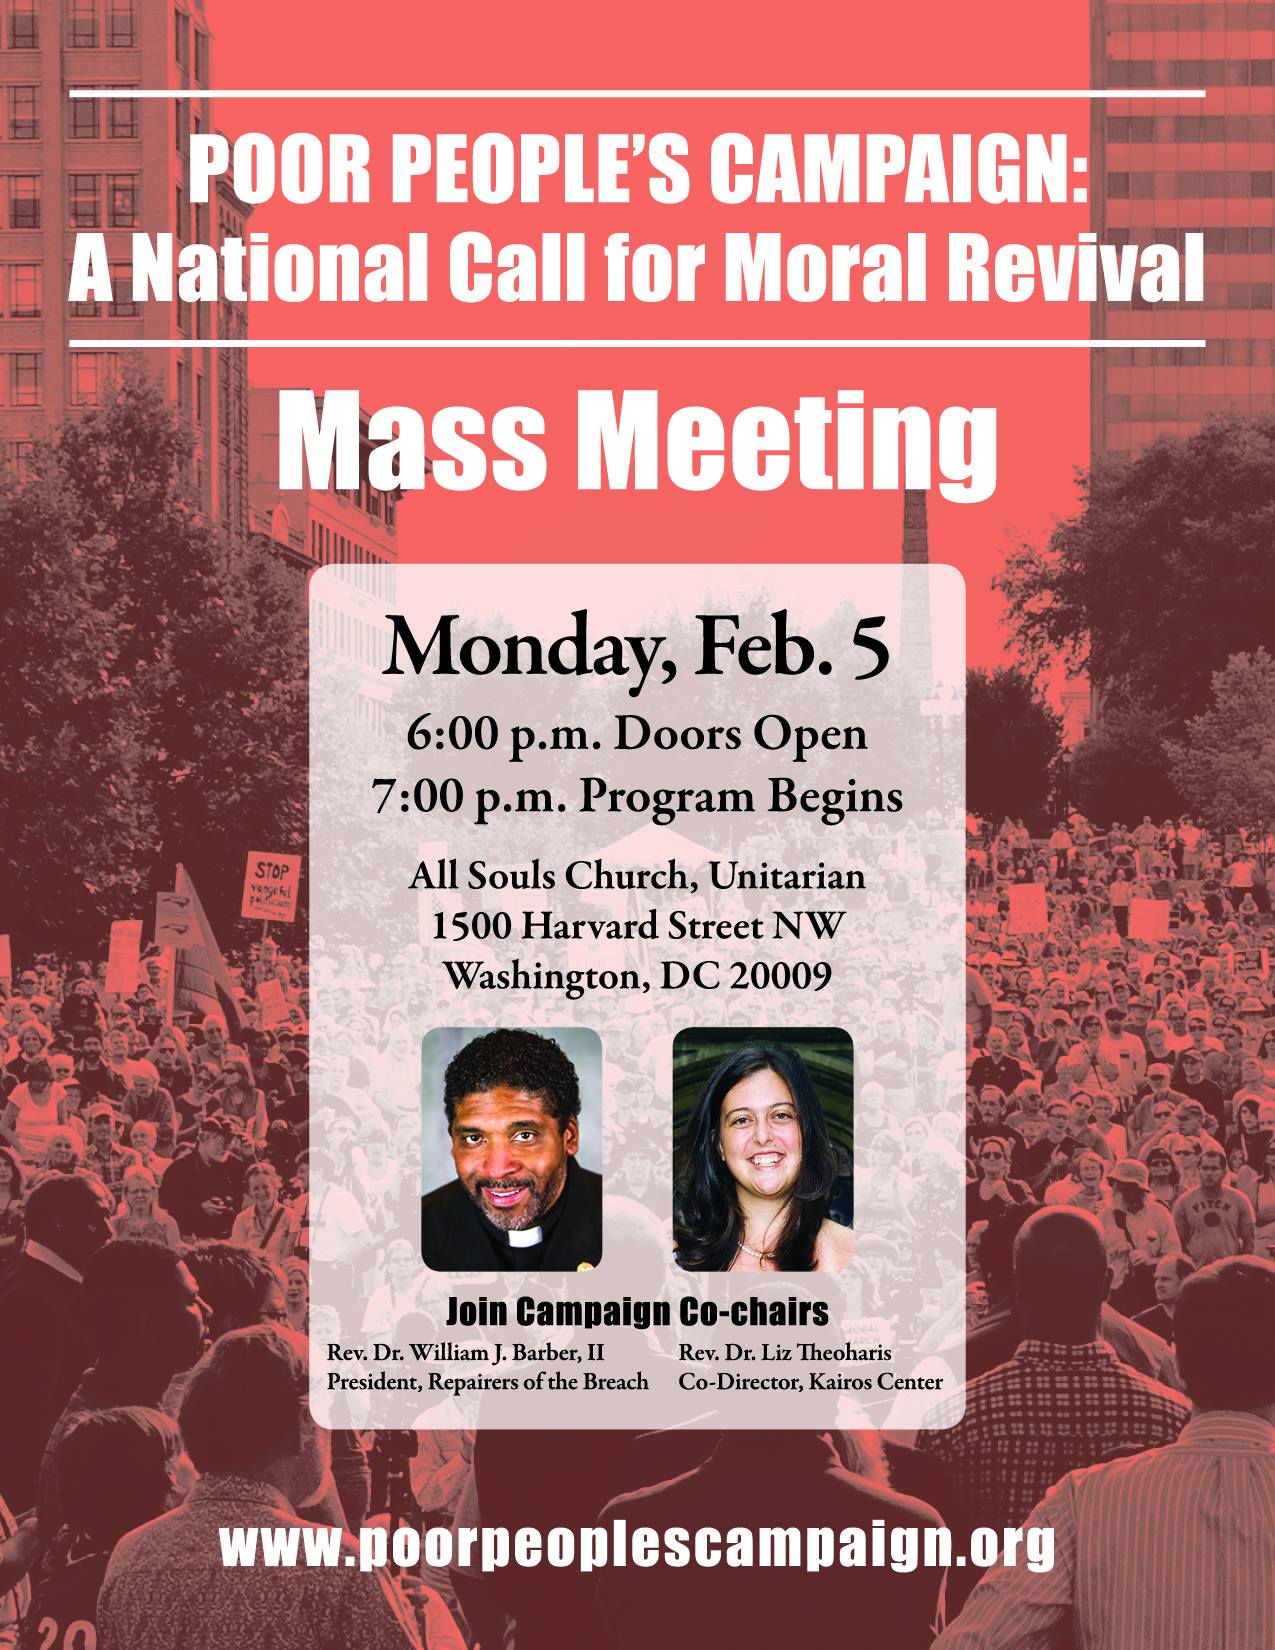 Poor People’s Campaign: Mass Meeting in Washington, D.C.